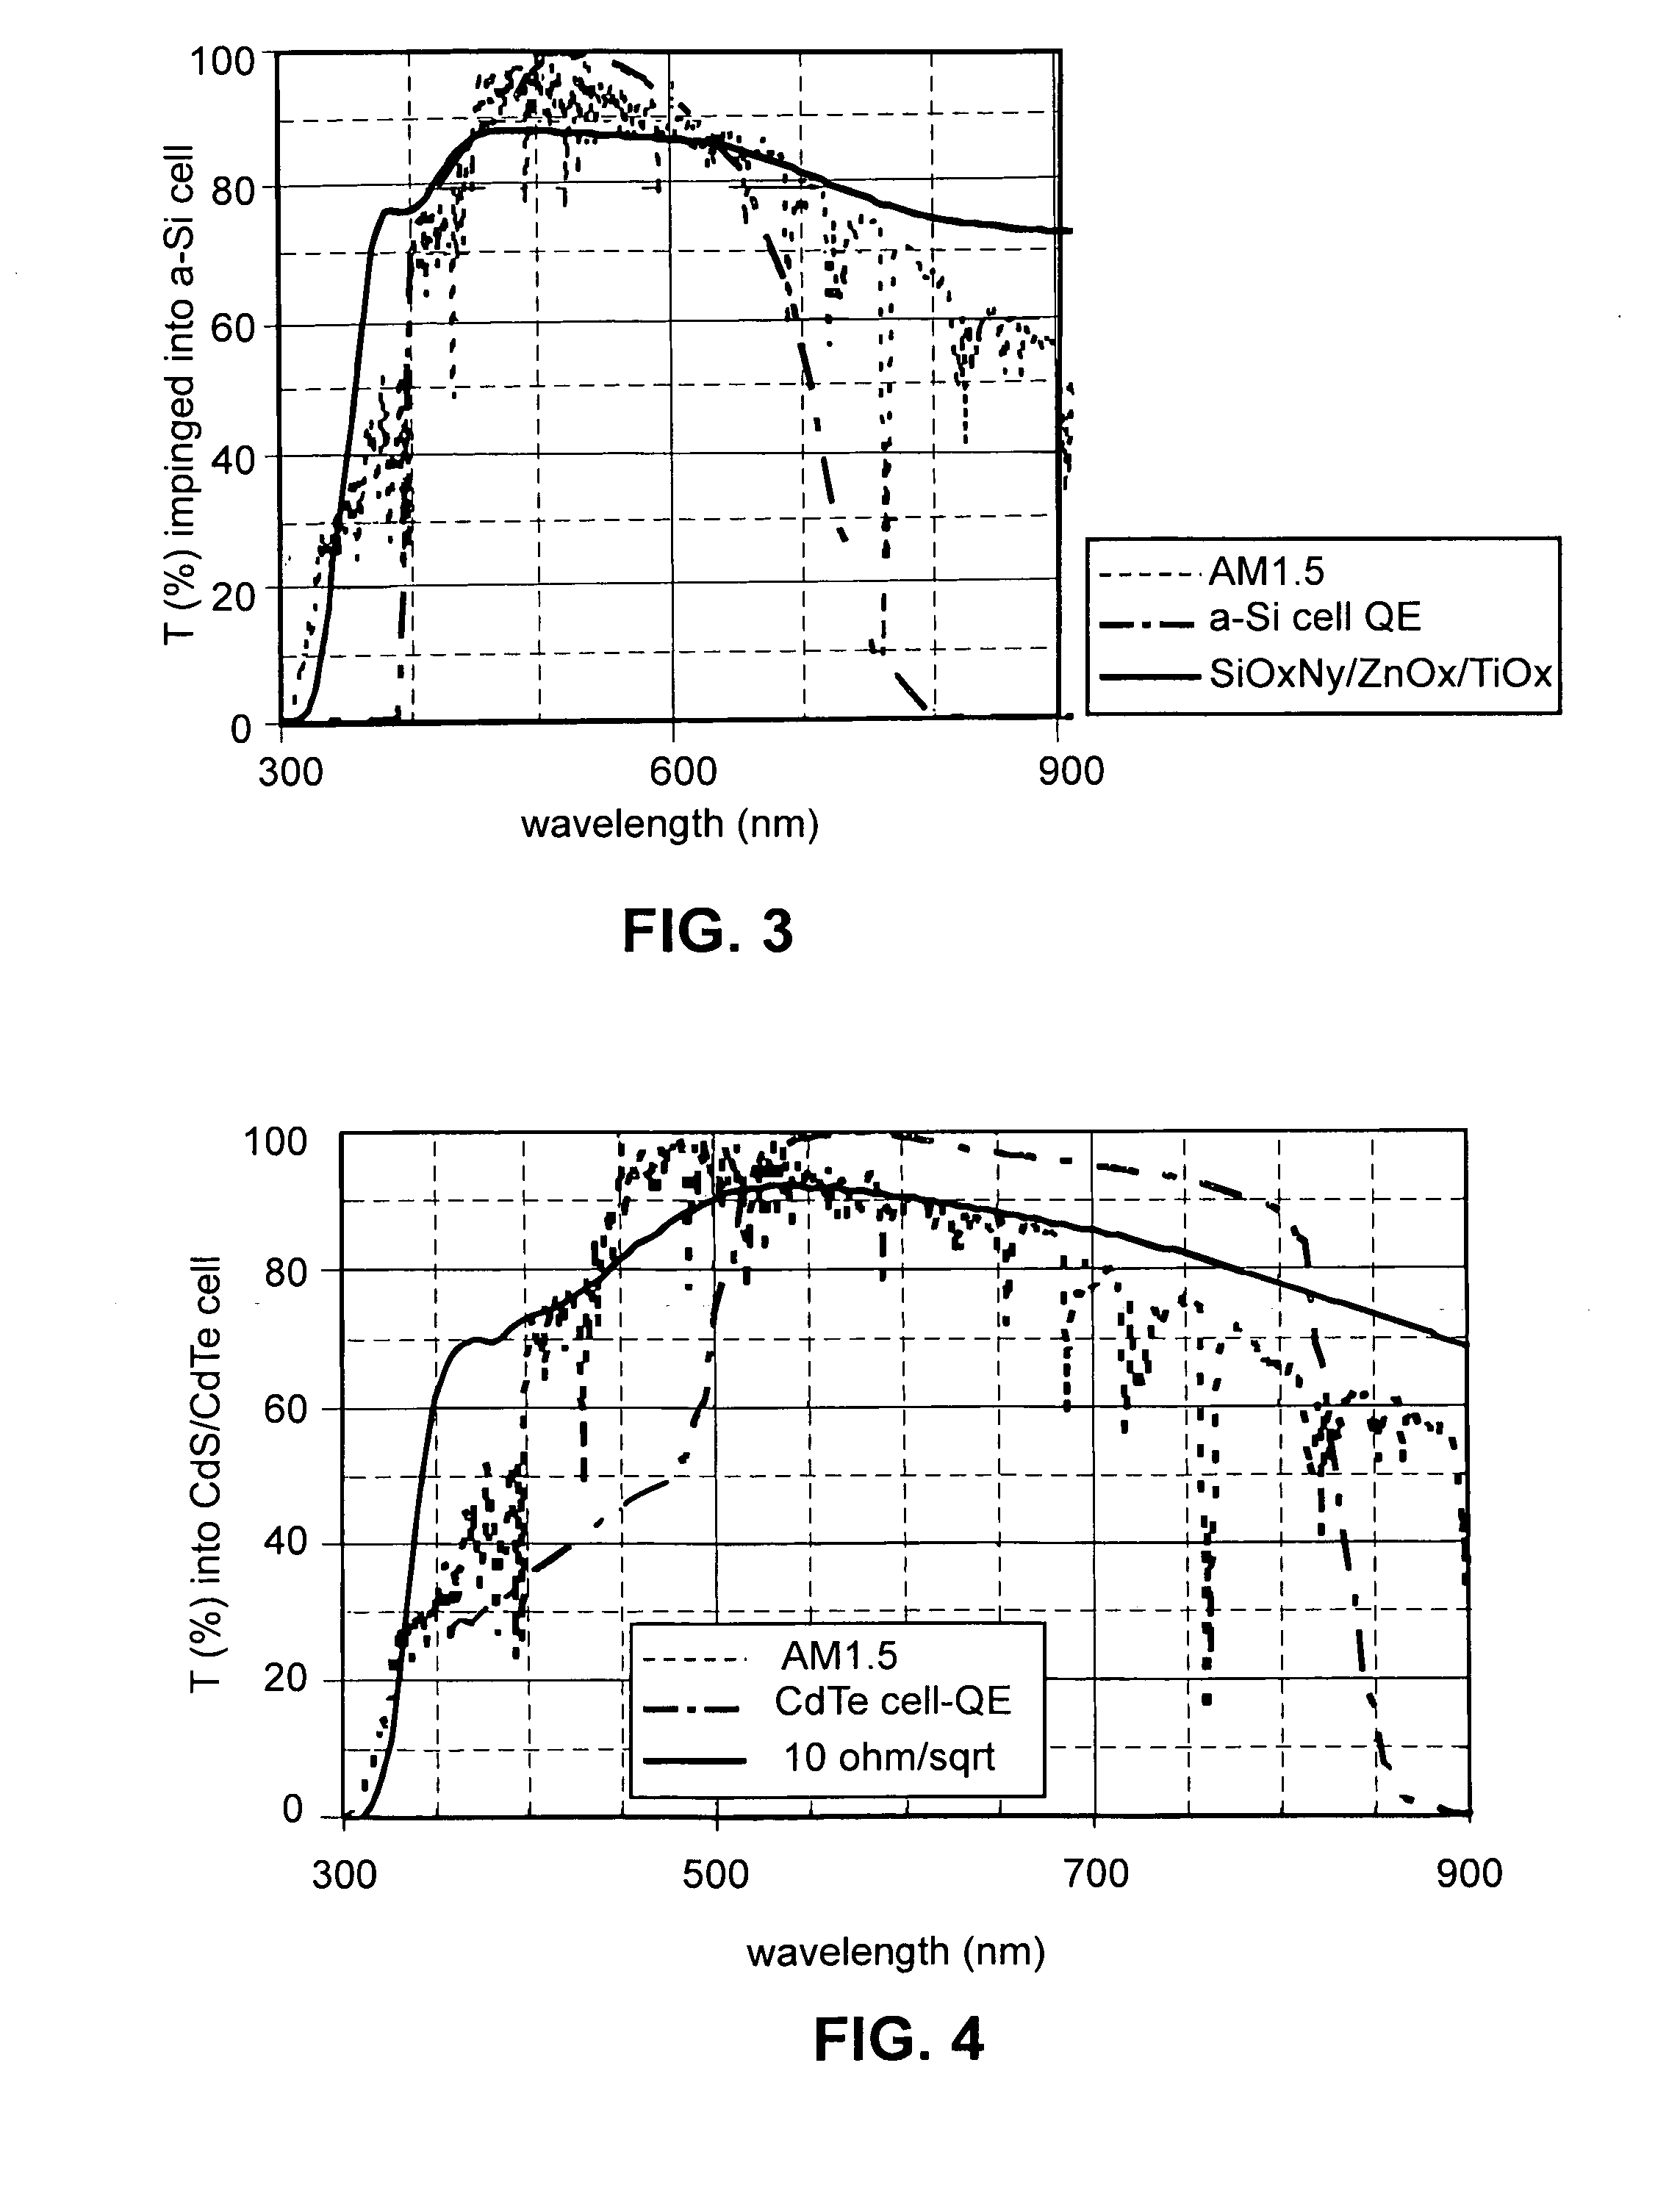 Front electrode including transparent conductive coating on patterned glass substrate for use in photovoltaic device and method of making same